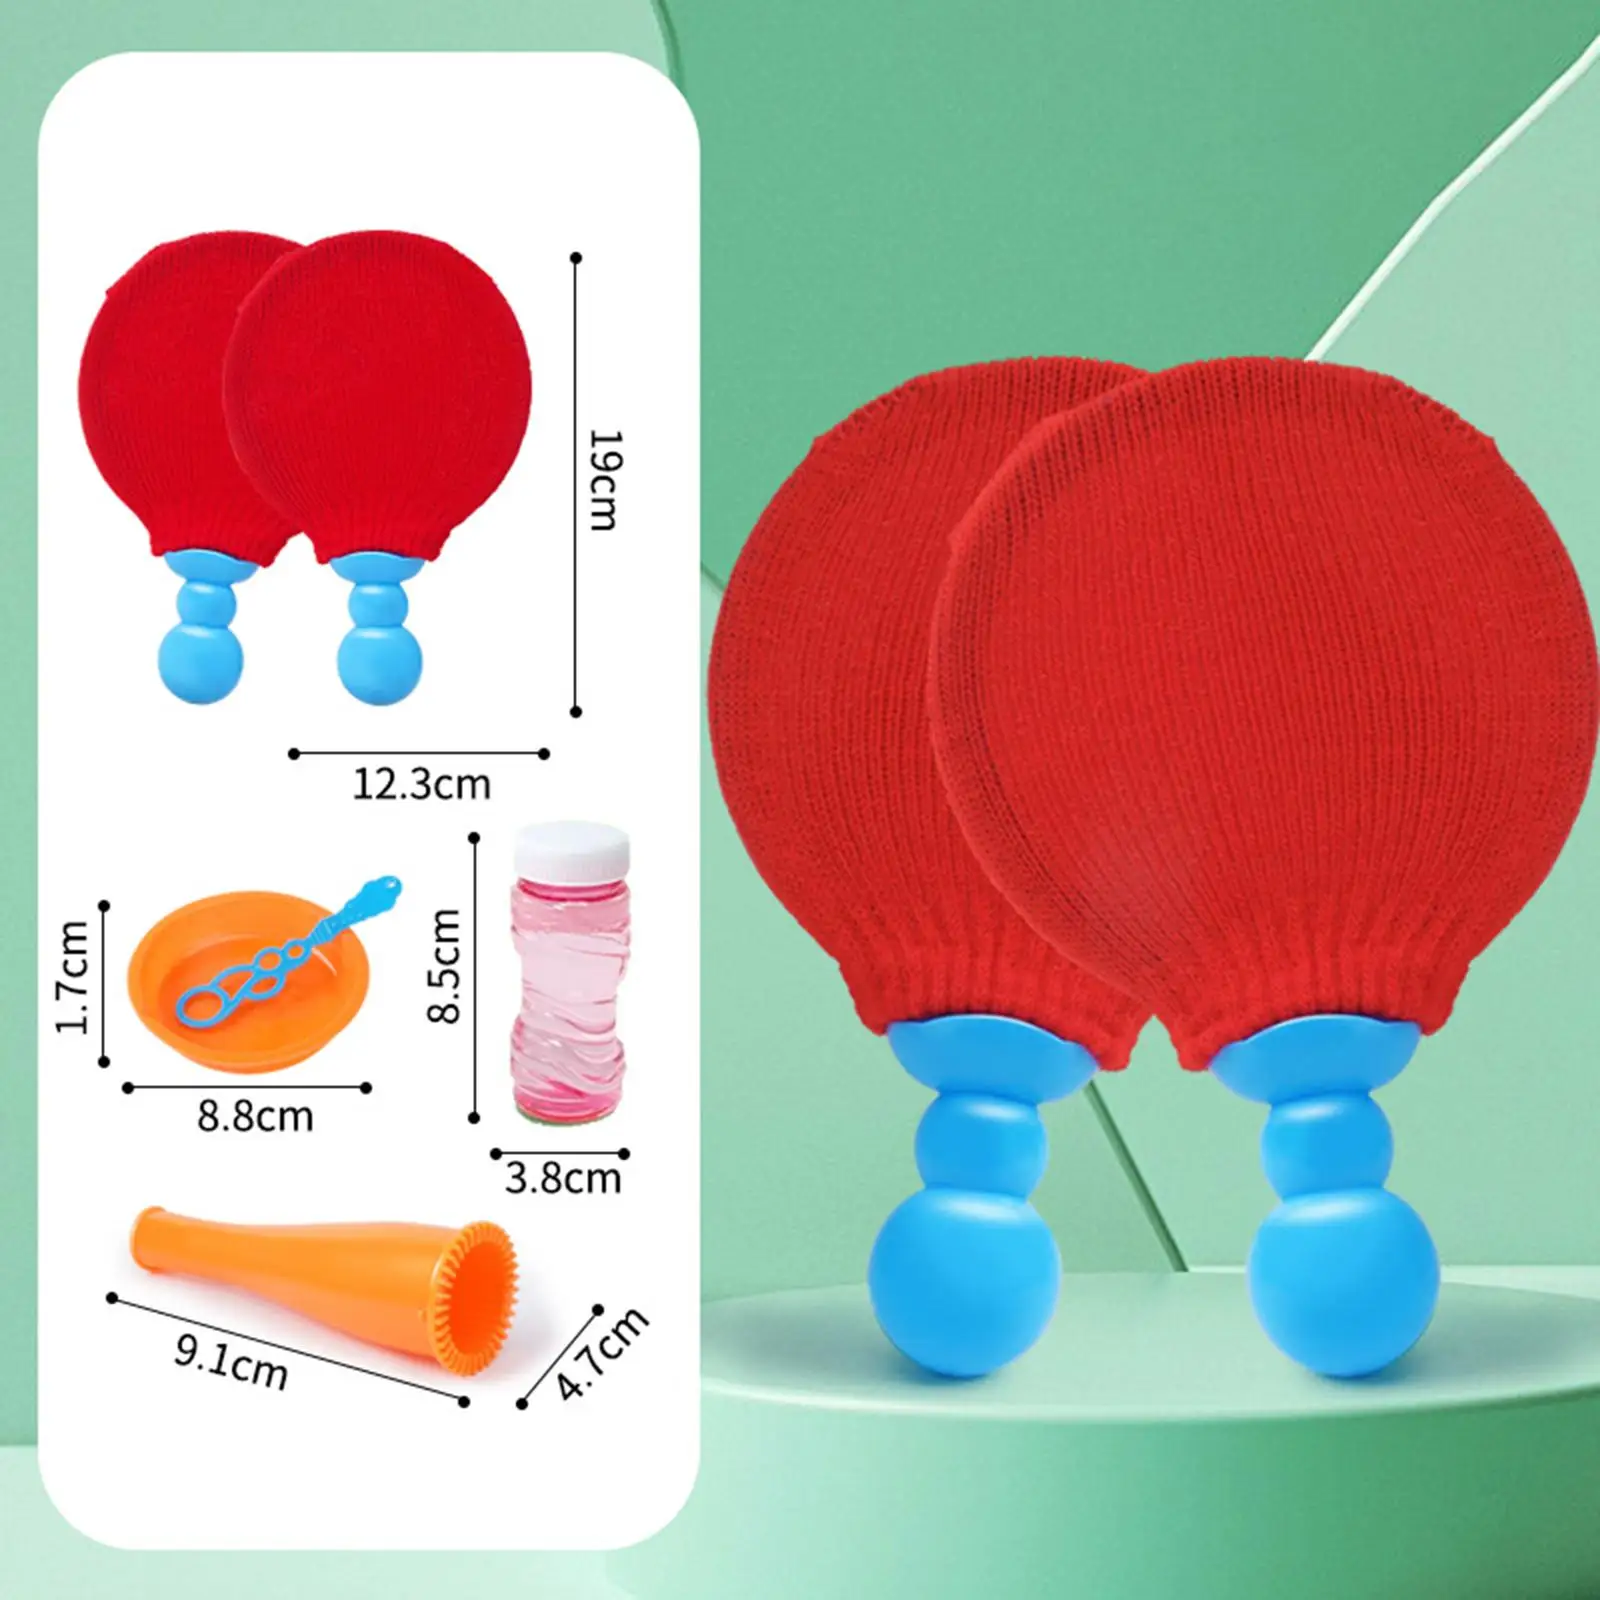 Bubble Toss and Catch Game Table Tennis Sports and Fun Exercise Toy for Beach Toys Lawn Backyard Party Activities Holiday Gift